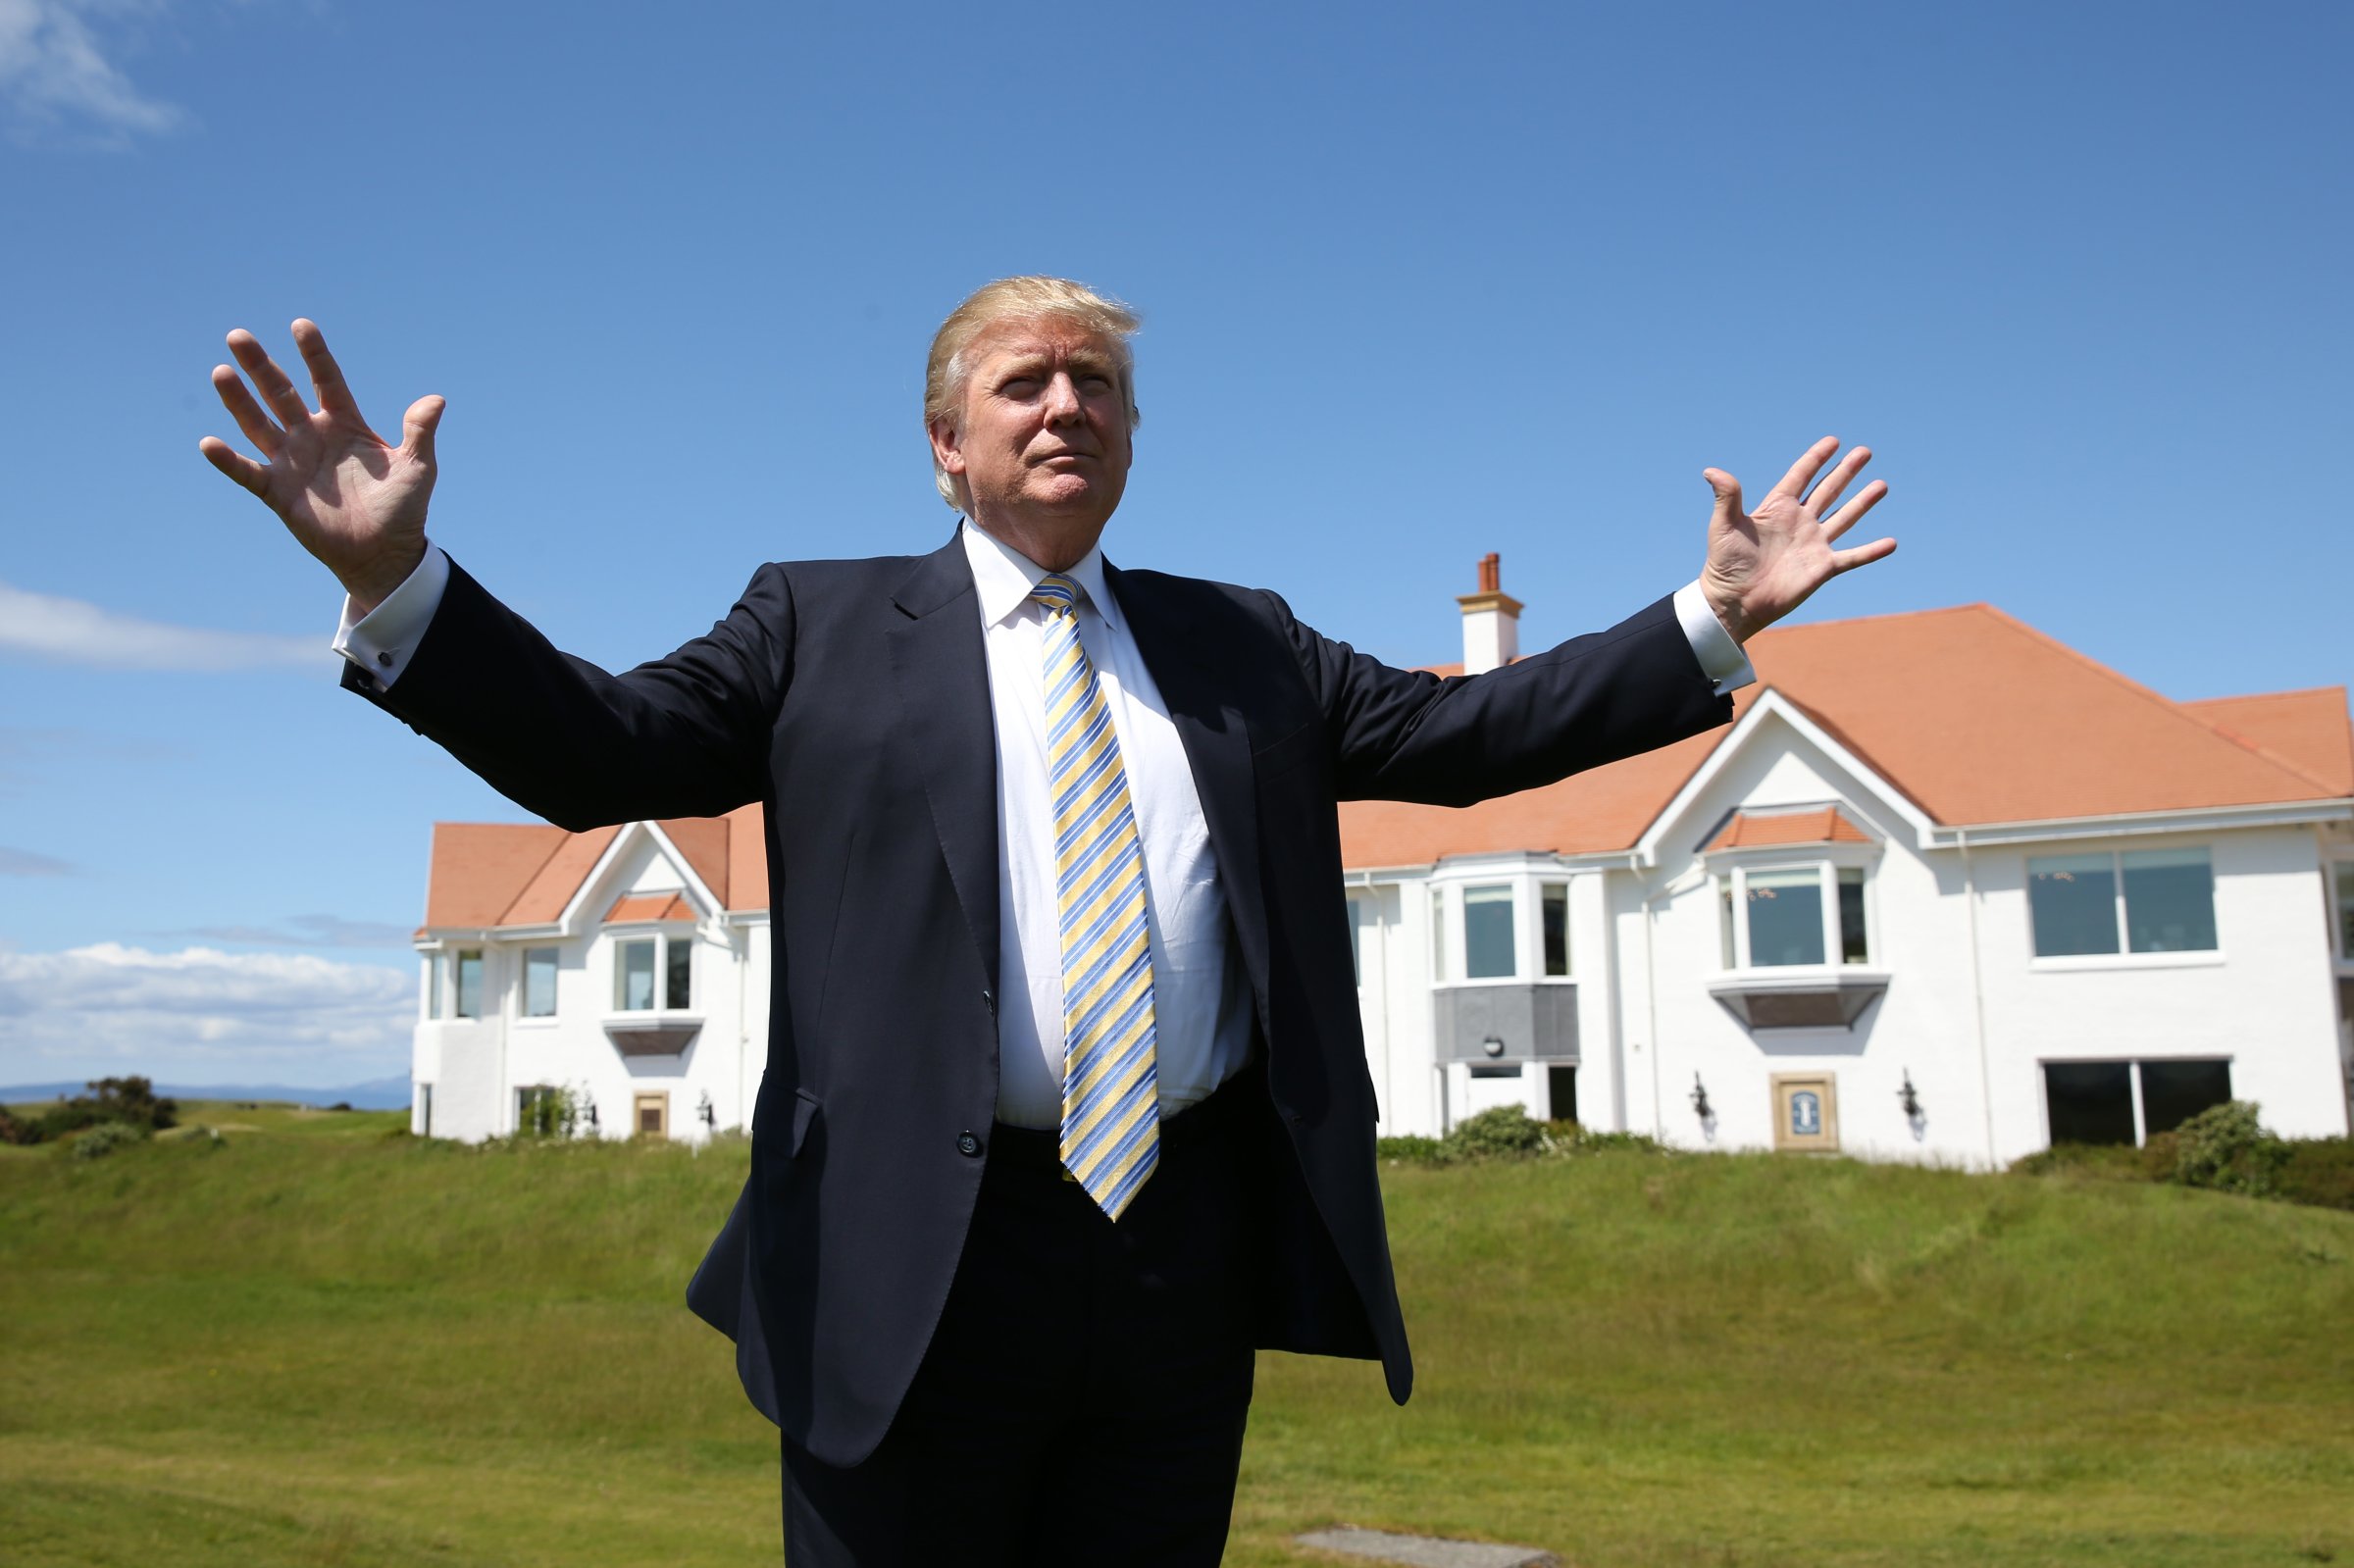 Donald Trump visits Turnberry Golf Club, after its $10 Million refurbishment, on June 8, 2015 in Turnberry, Scotland.